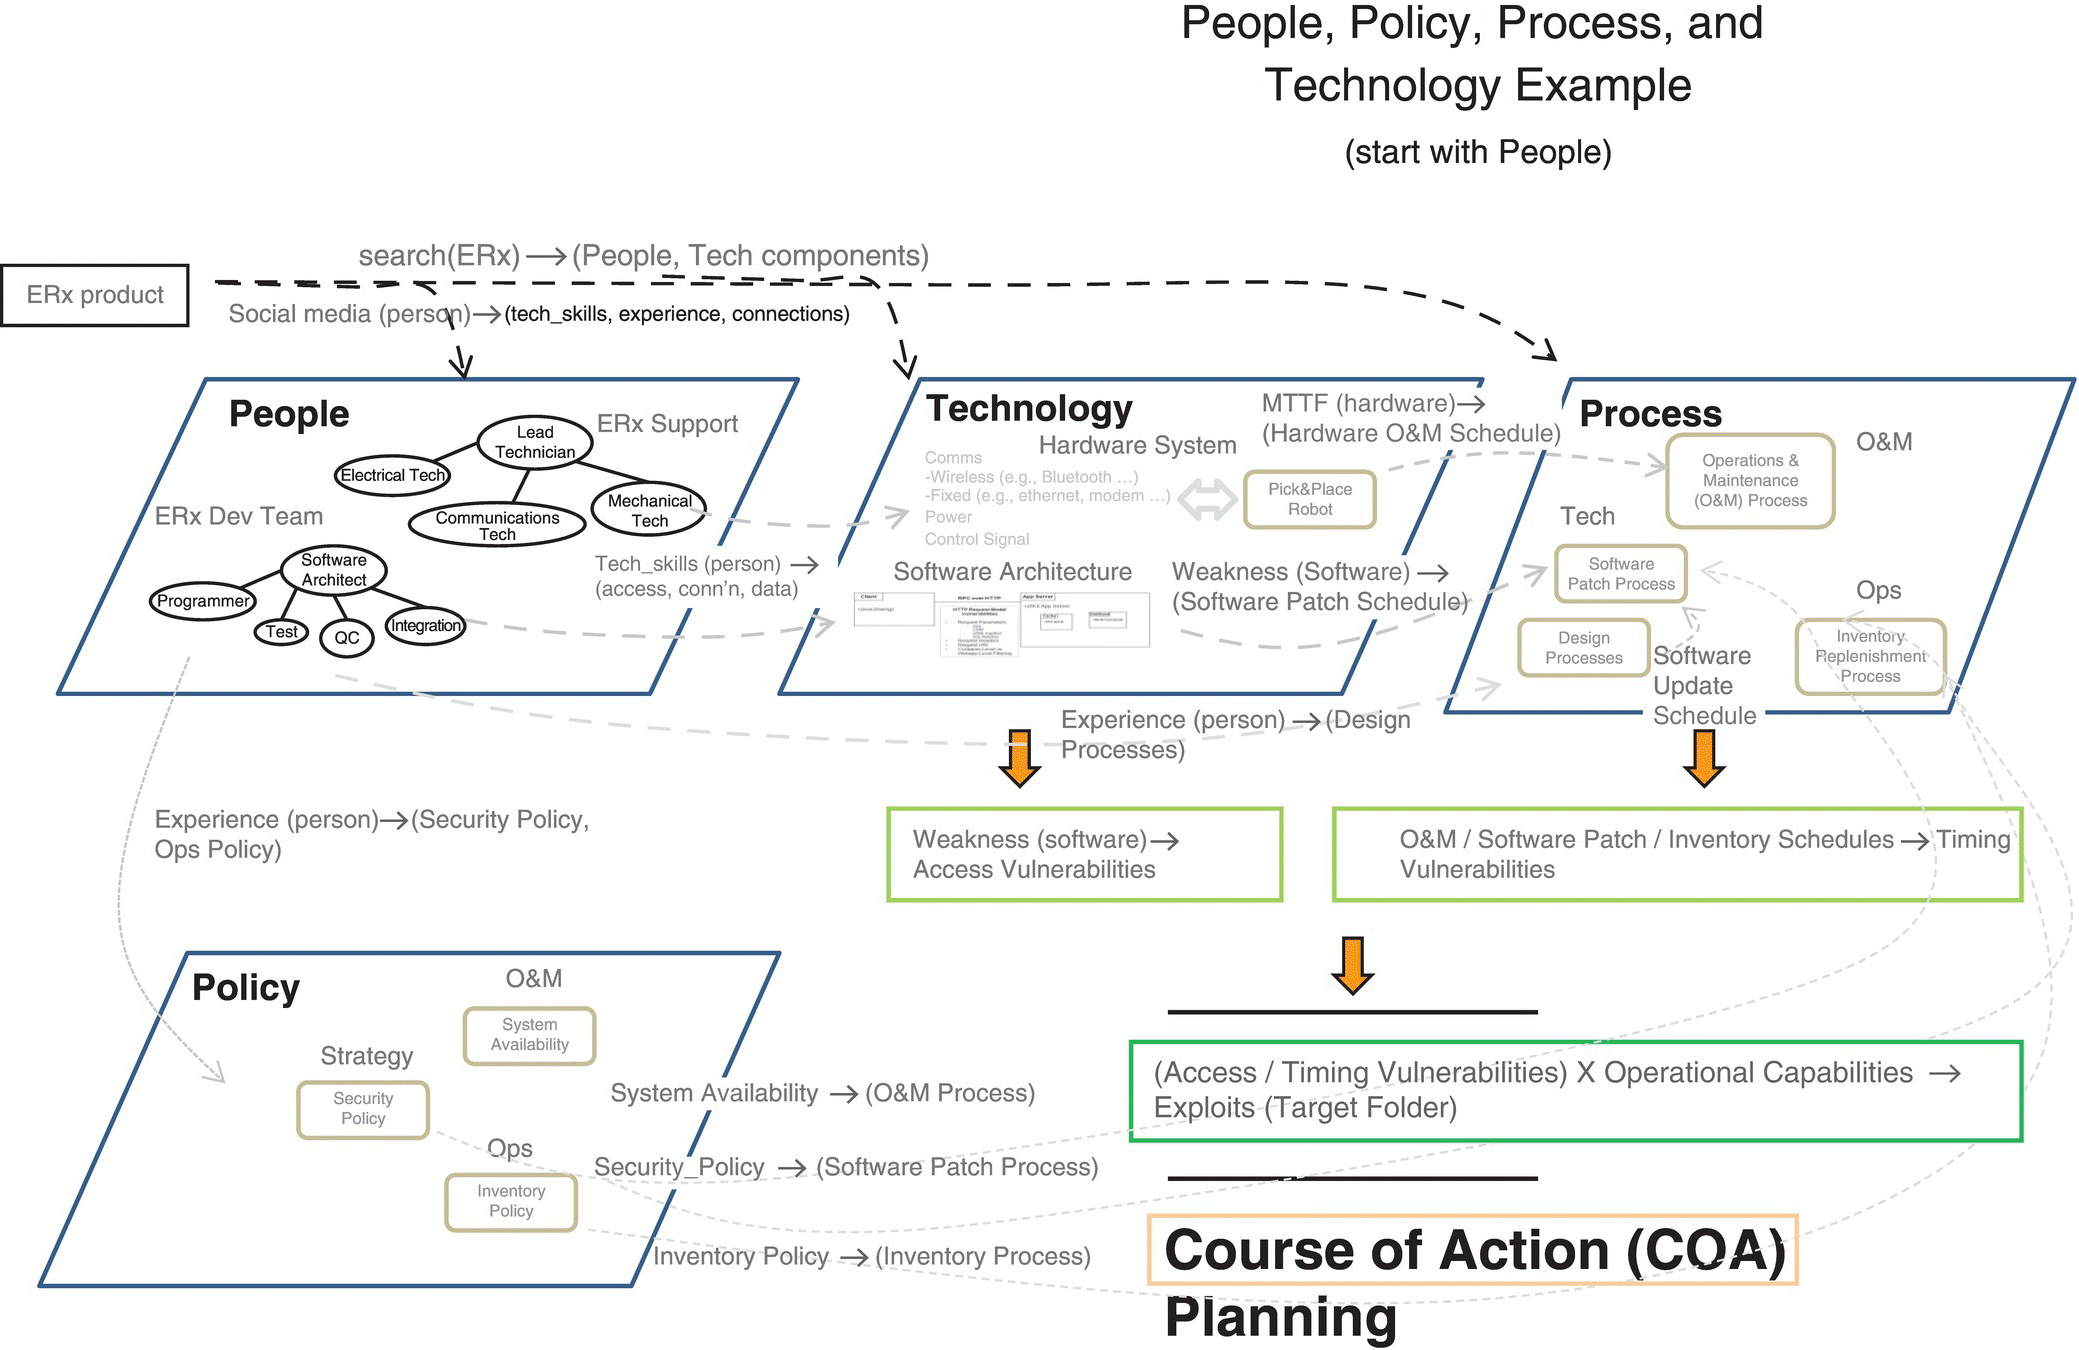 Enterprise connections (people/policy/process/technology) depicted by parallelograms with COA planning. A box labeled ERx product has 3 dashed arrows pointing to people, technology, and process.